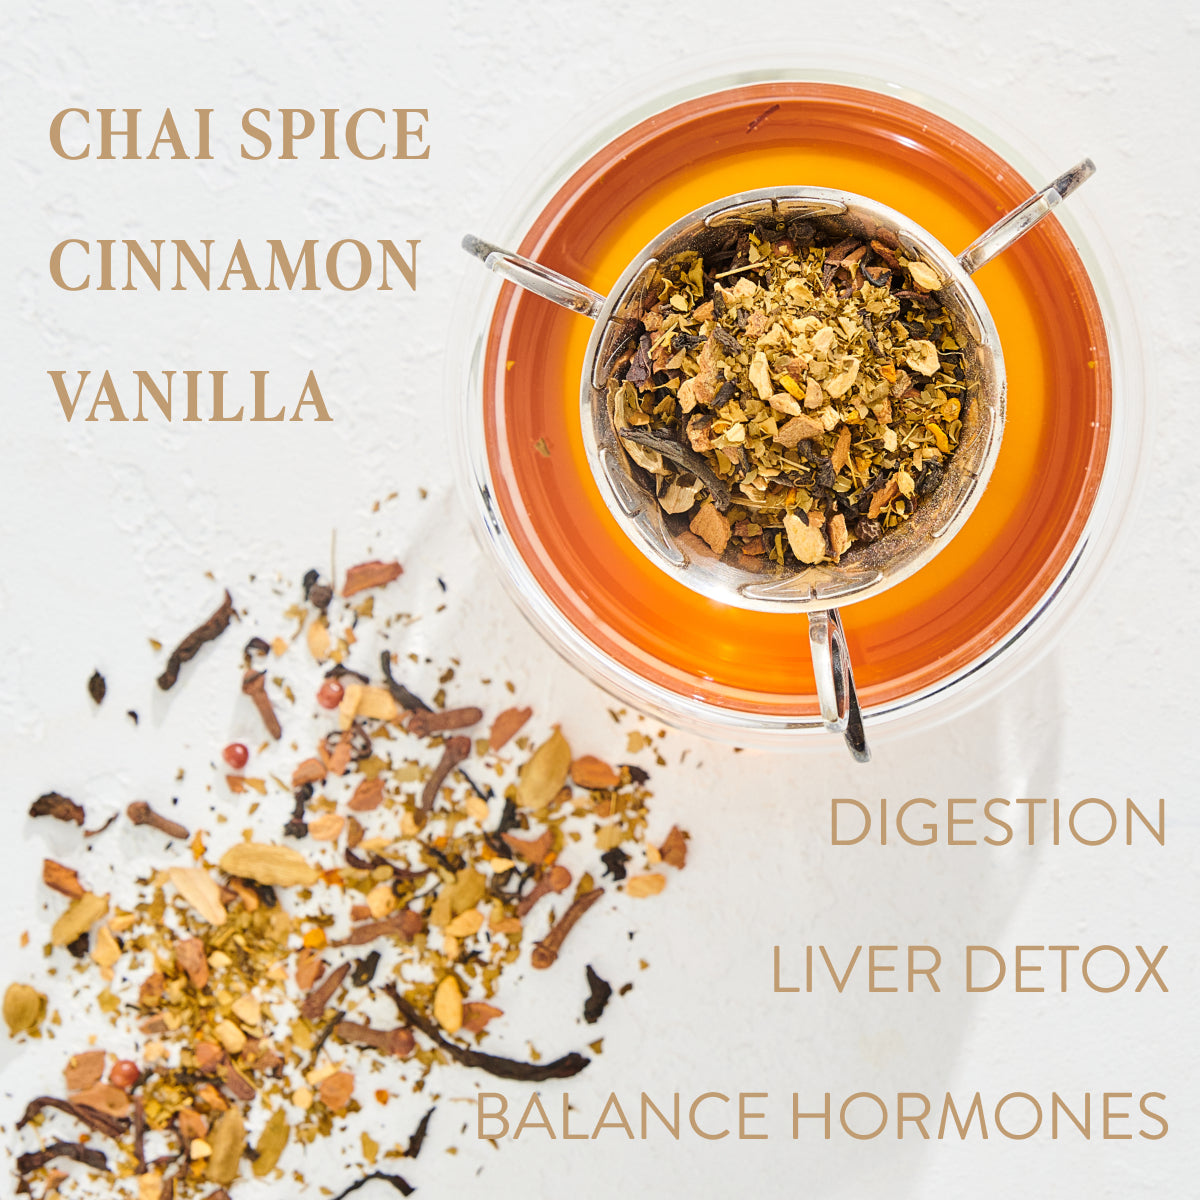 A glass cup filled with Moringa Moon Herbal Tea sits on a clear saucer. Loose leaf tea is scattered next to the cup. Text on the left reads "Chai Spice, Cinnamon, Vanilla." Text on the right reads "Digestion, Liver Detox, Balance Hormones." Enjoy the magic of organic tea with every sip from Club Magic Hour.